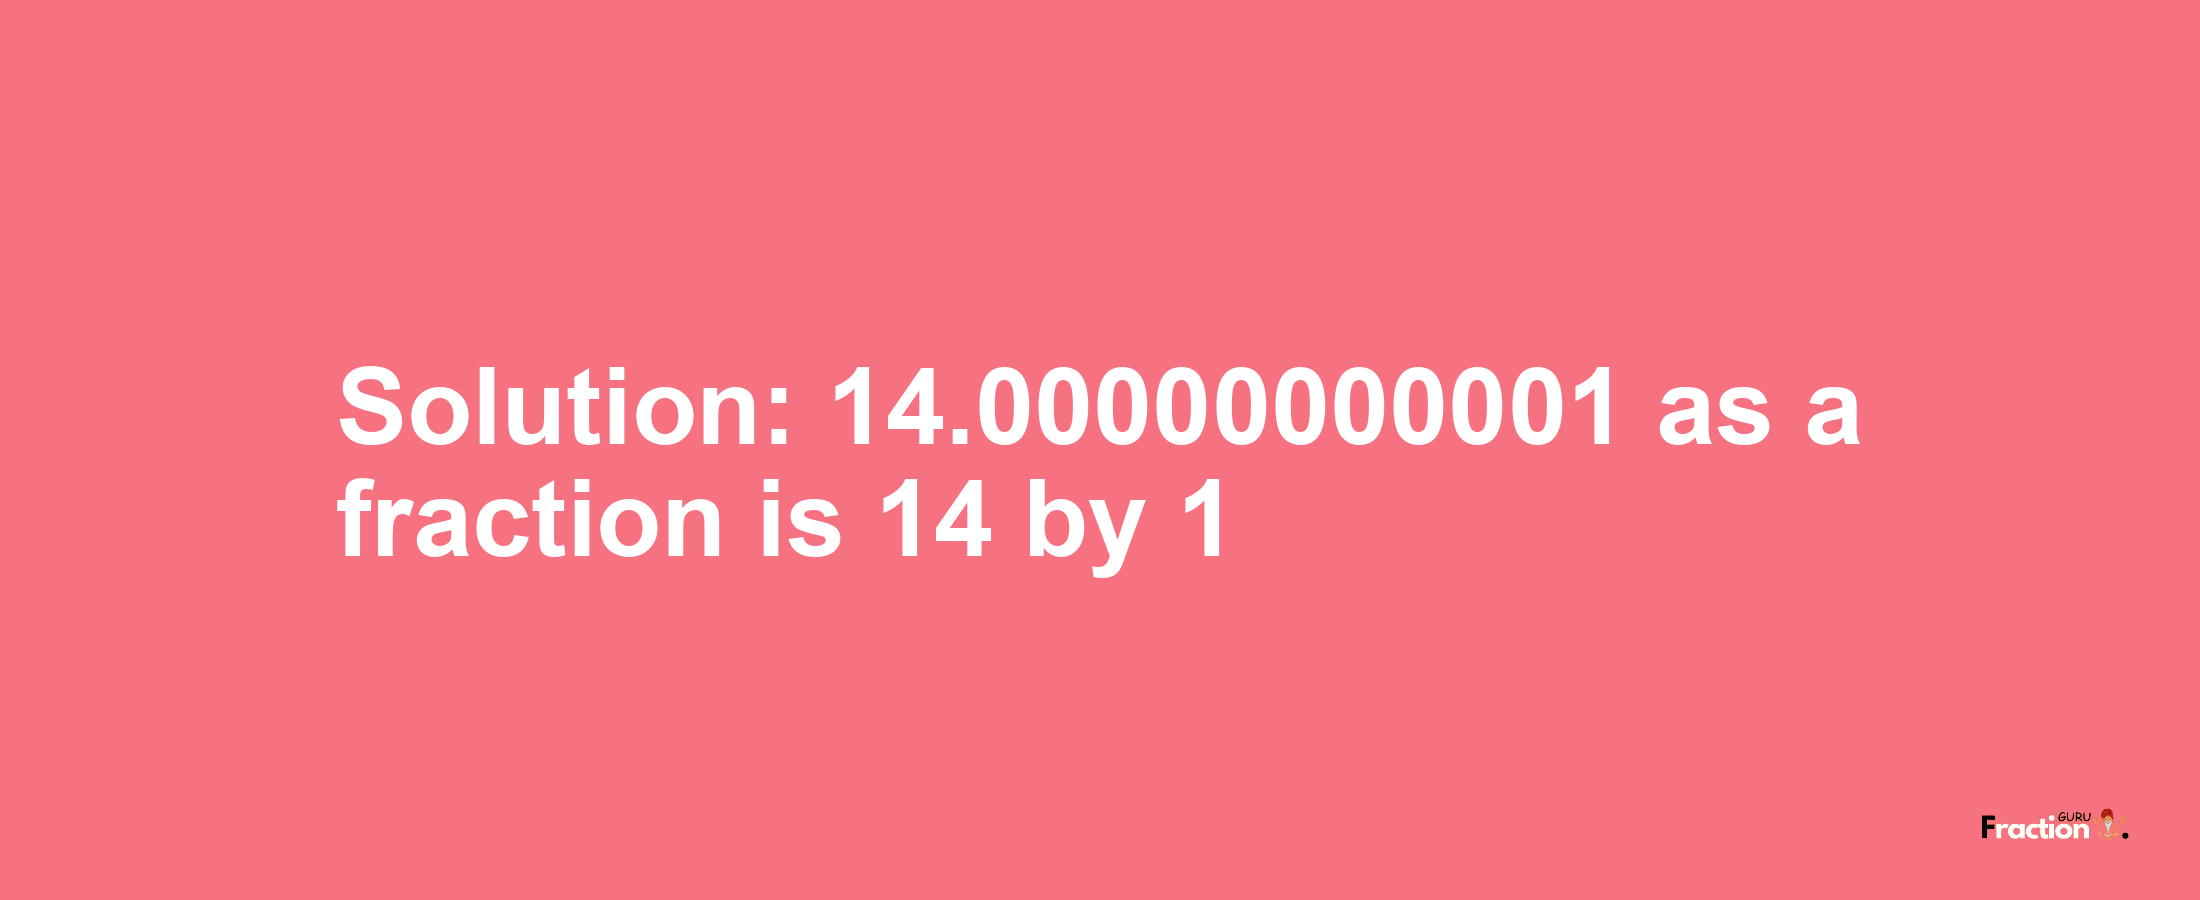 Solution:14.00000000001 as a fraction is 14/1